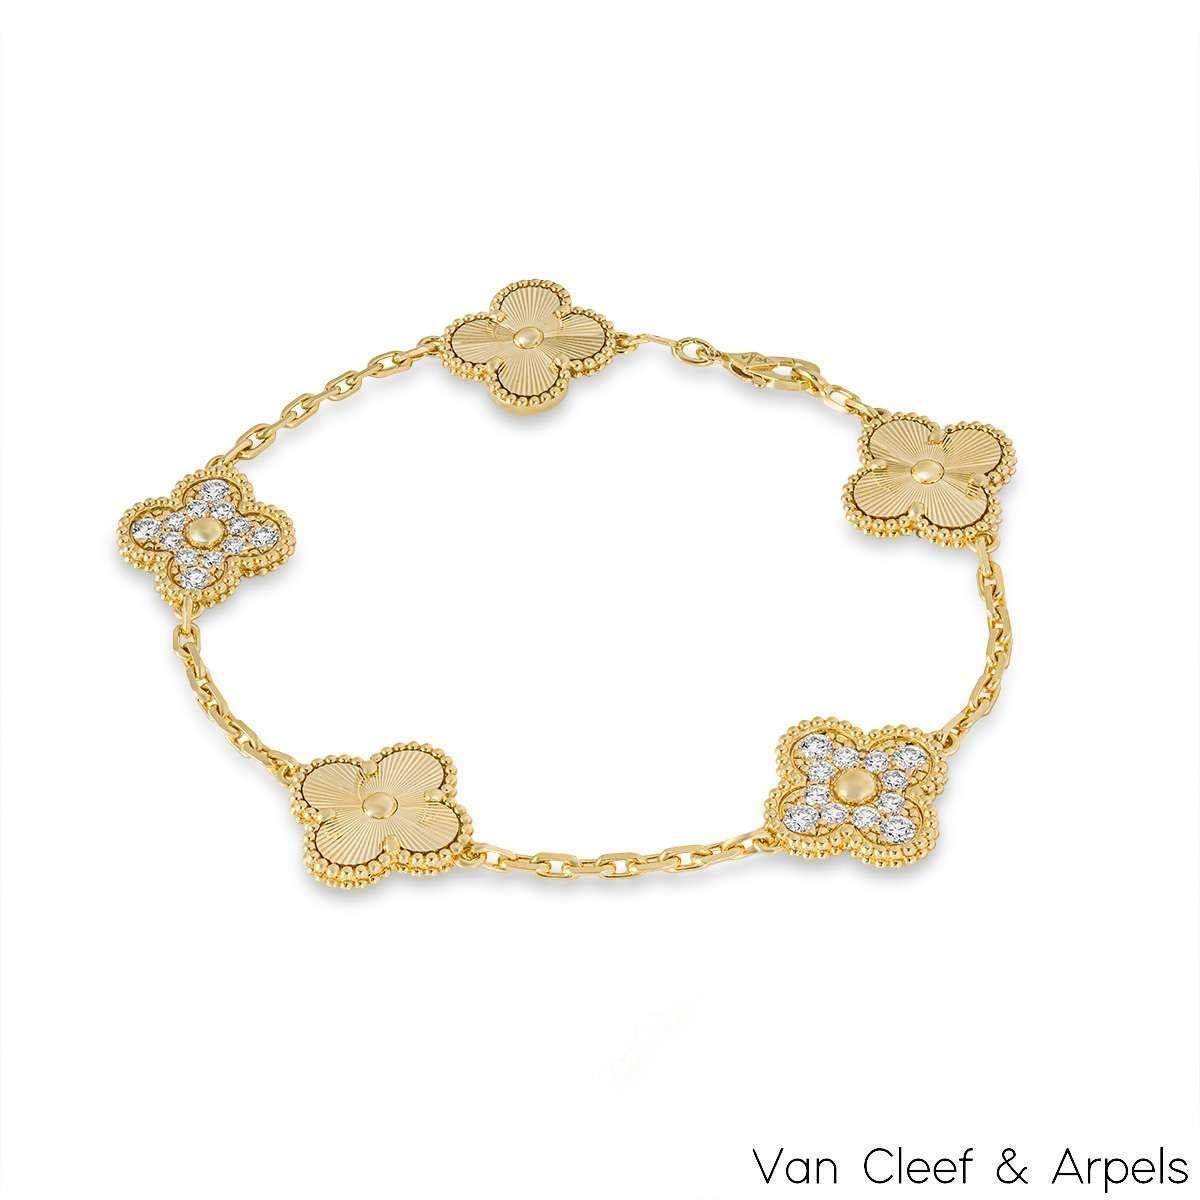 An 18k yellow gold diamond guilloche bracelet, from the Vintage Alhambra collection by Van Cleef and Arpels (VCA). The bracelet is made up of 5 alternating iconic clover motifs, three feature guilloche patterns and the other two feature diamond set